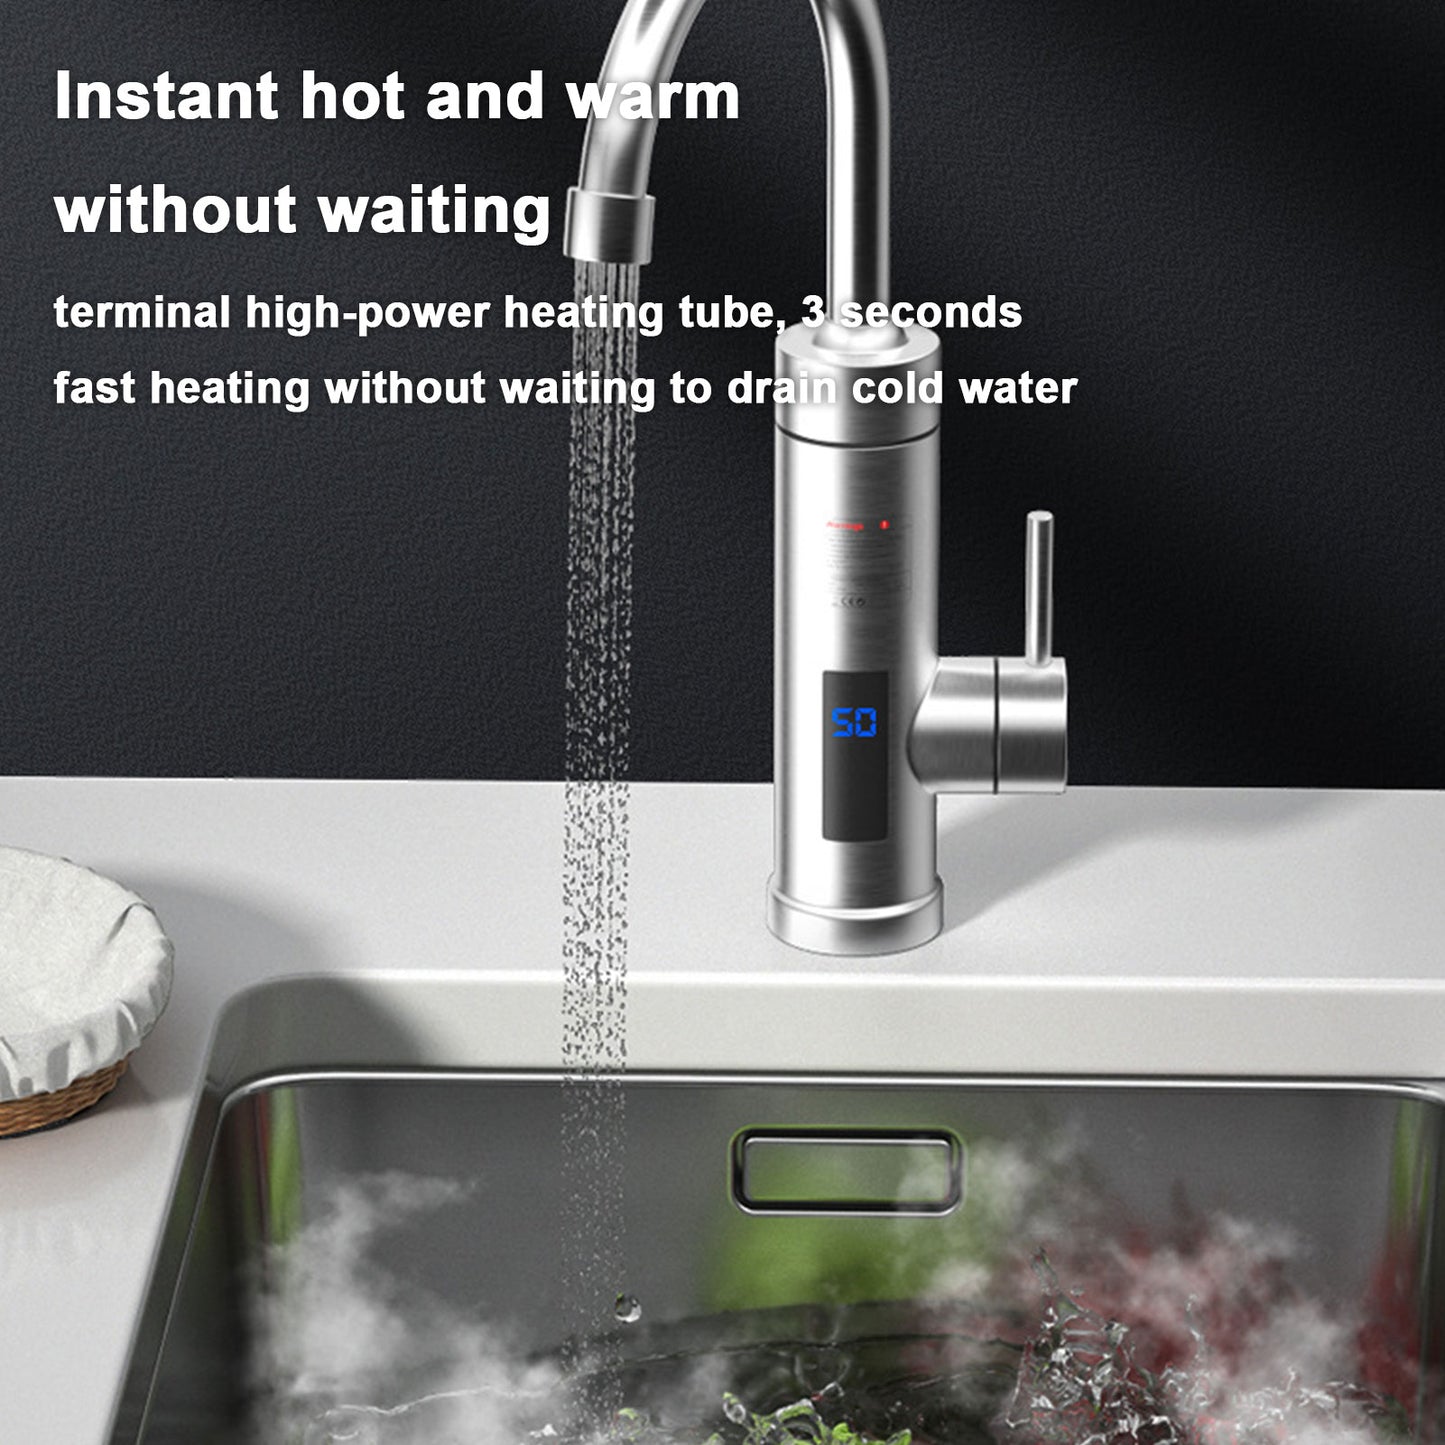 Instant Hot Water Faucet Water Faucet For Kitchen Sink Instant Hot And Cold Water Dispenser Faucet Faucet With Digital Display - WELQUEEN HOME DECOR